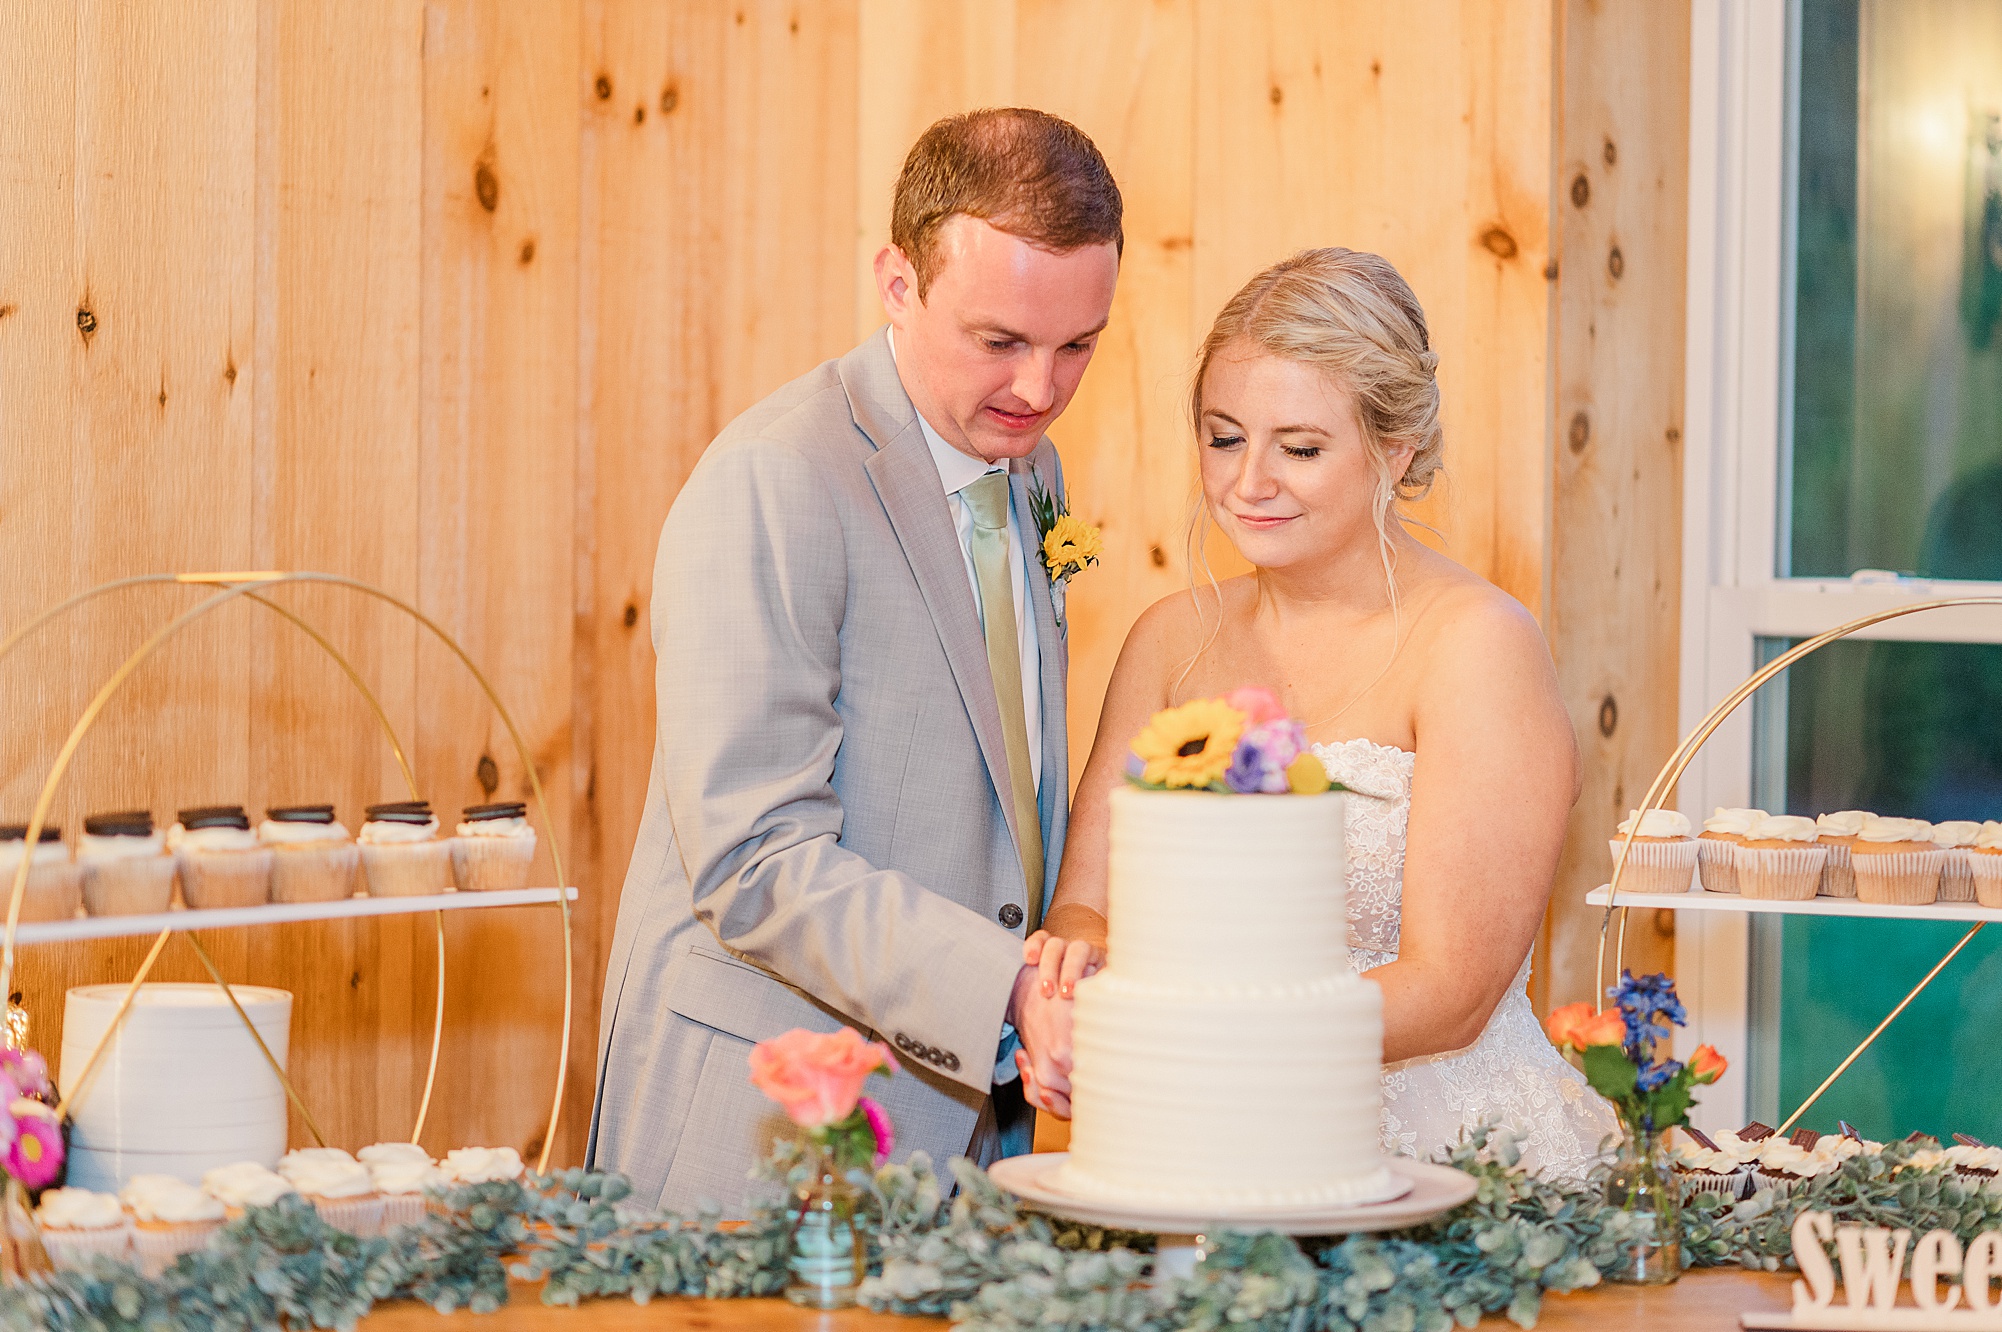 Wedding Reception at Barn at Timber Creek Wedding. Wedding Photography by Kailey Brianne Photography